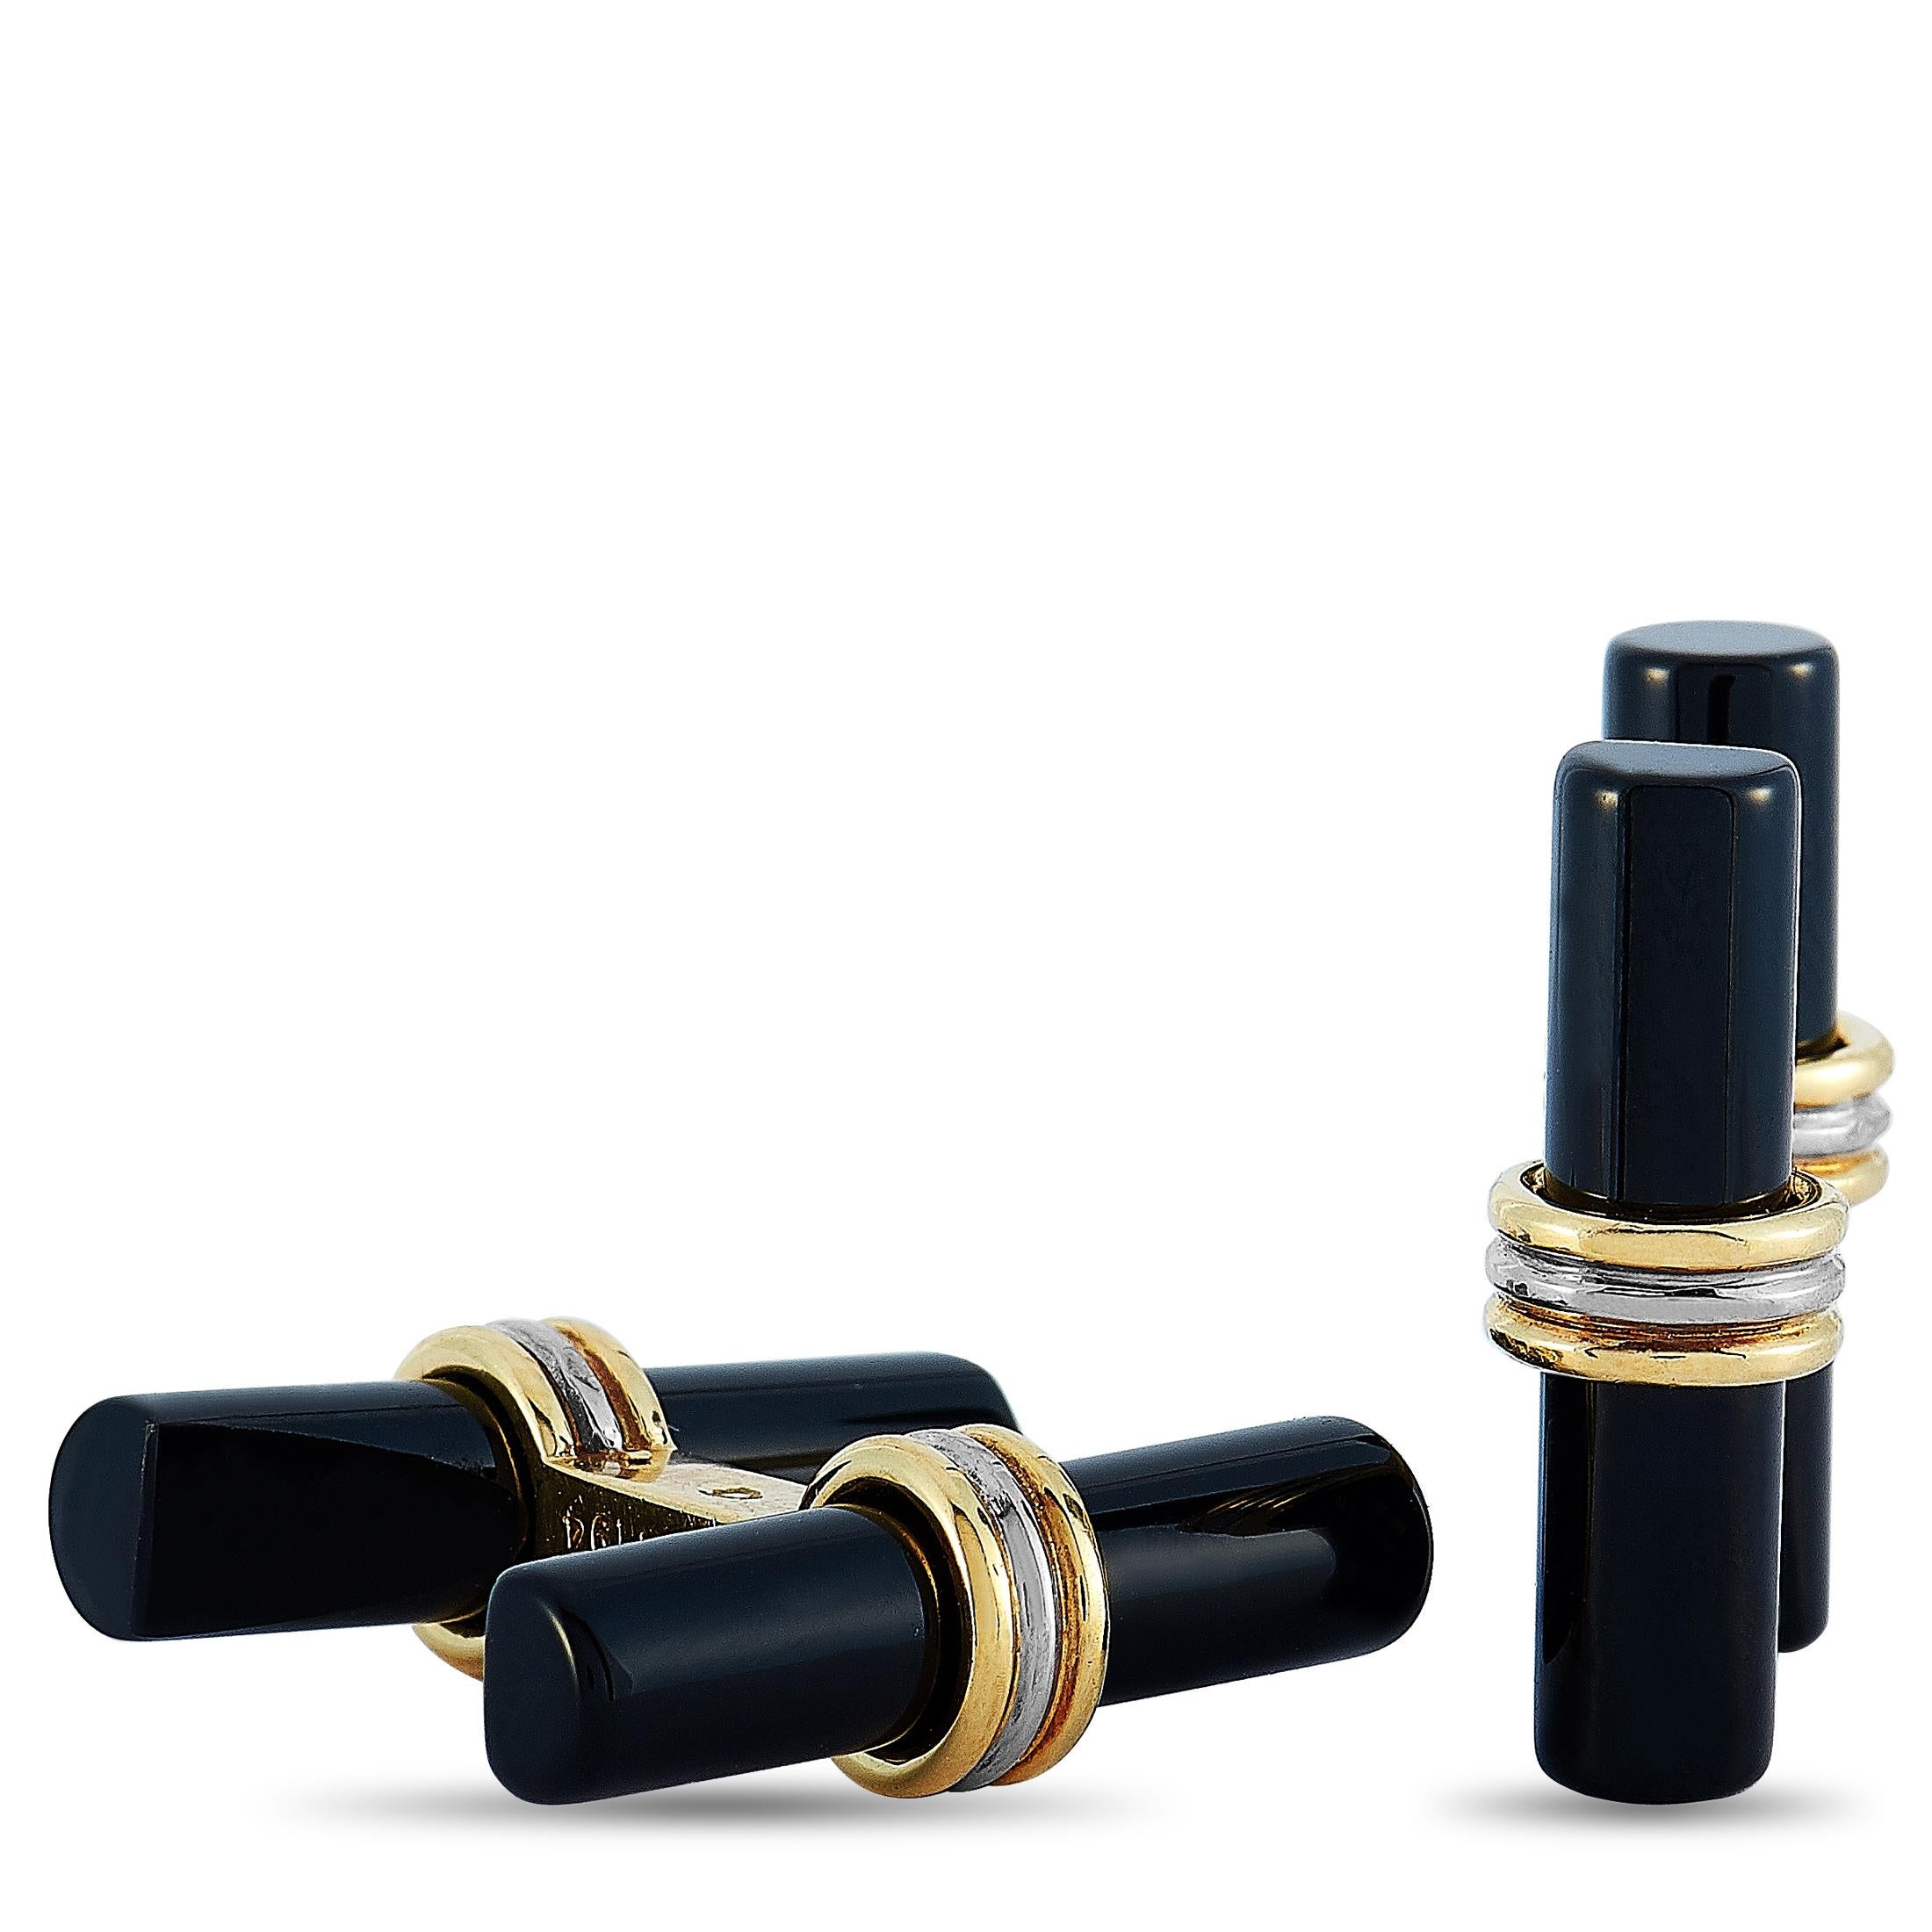 These Van Cleef & Arpels cufflinks are made out of 18K yellow and white gold and onyx. The cufflinks measure 0.87” in length and 0.30” in width, and each of the two weighs 5.05 grams.

The pair is offered in estate condition and includes the